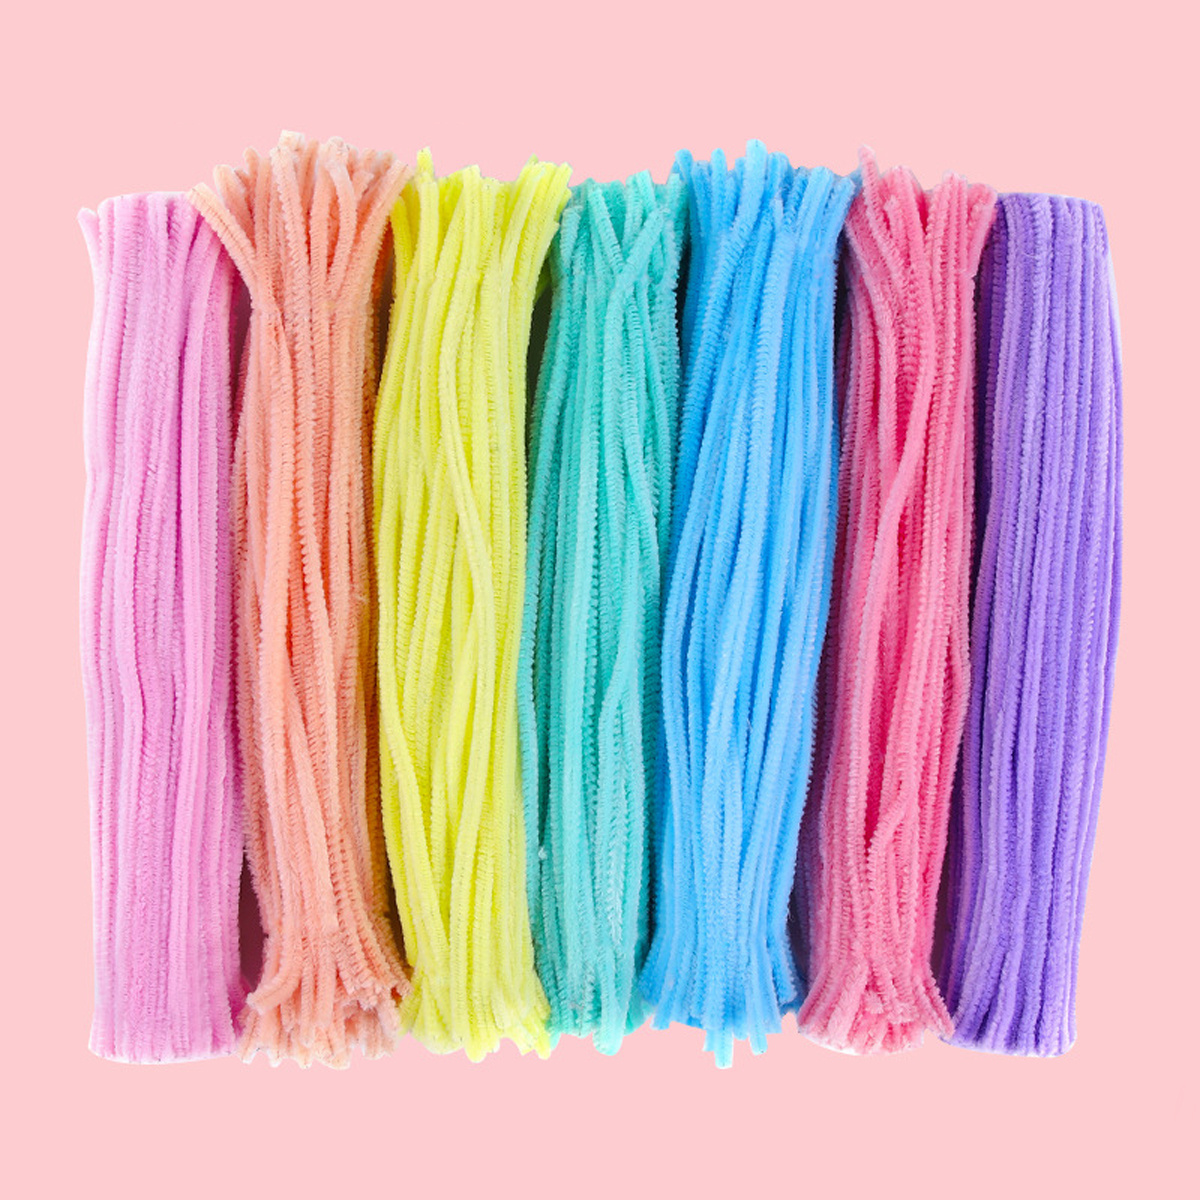 THICK ASSORTED PIPE CLEANERS 12 PCS - The School Depot